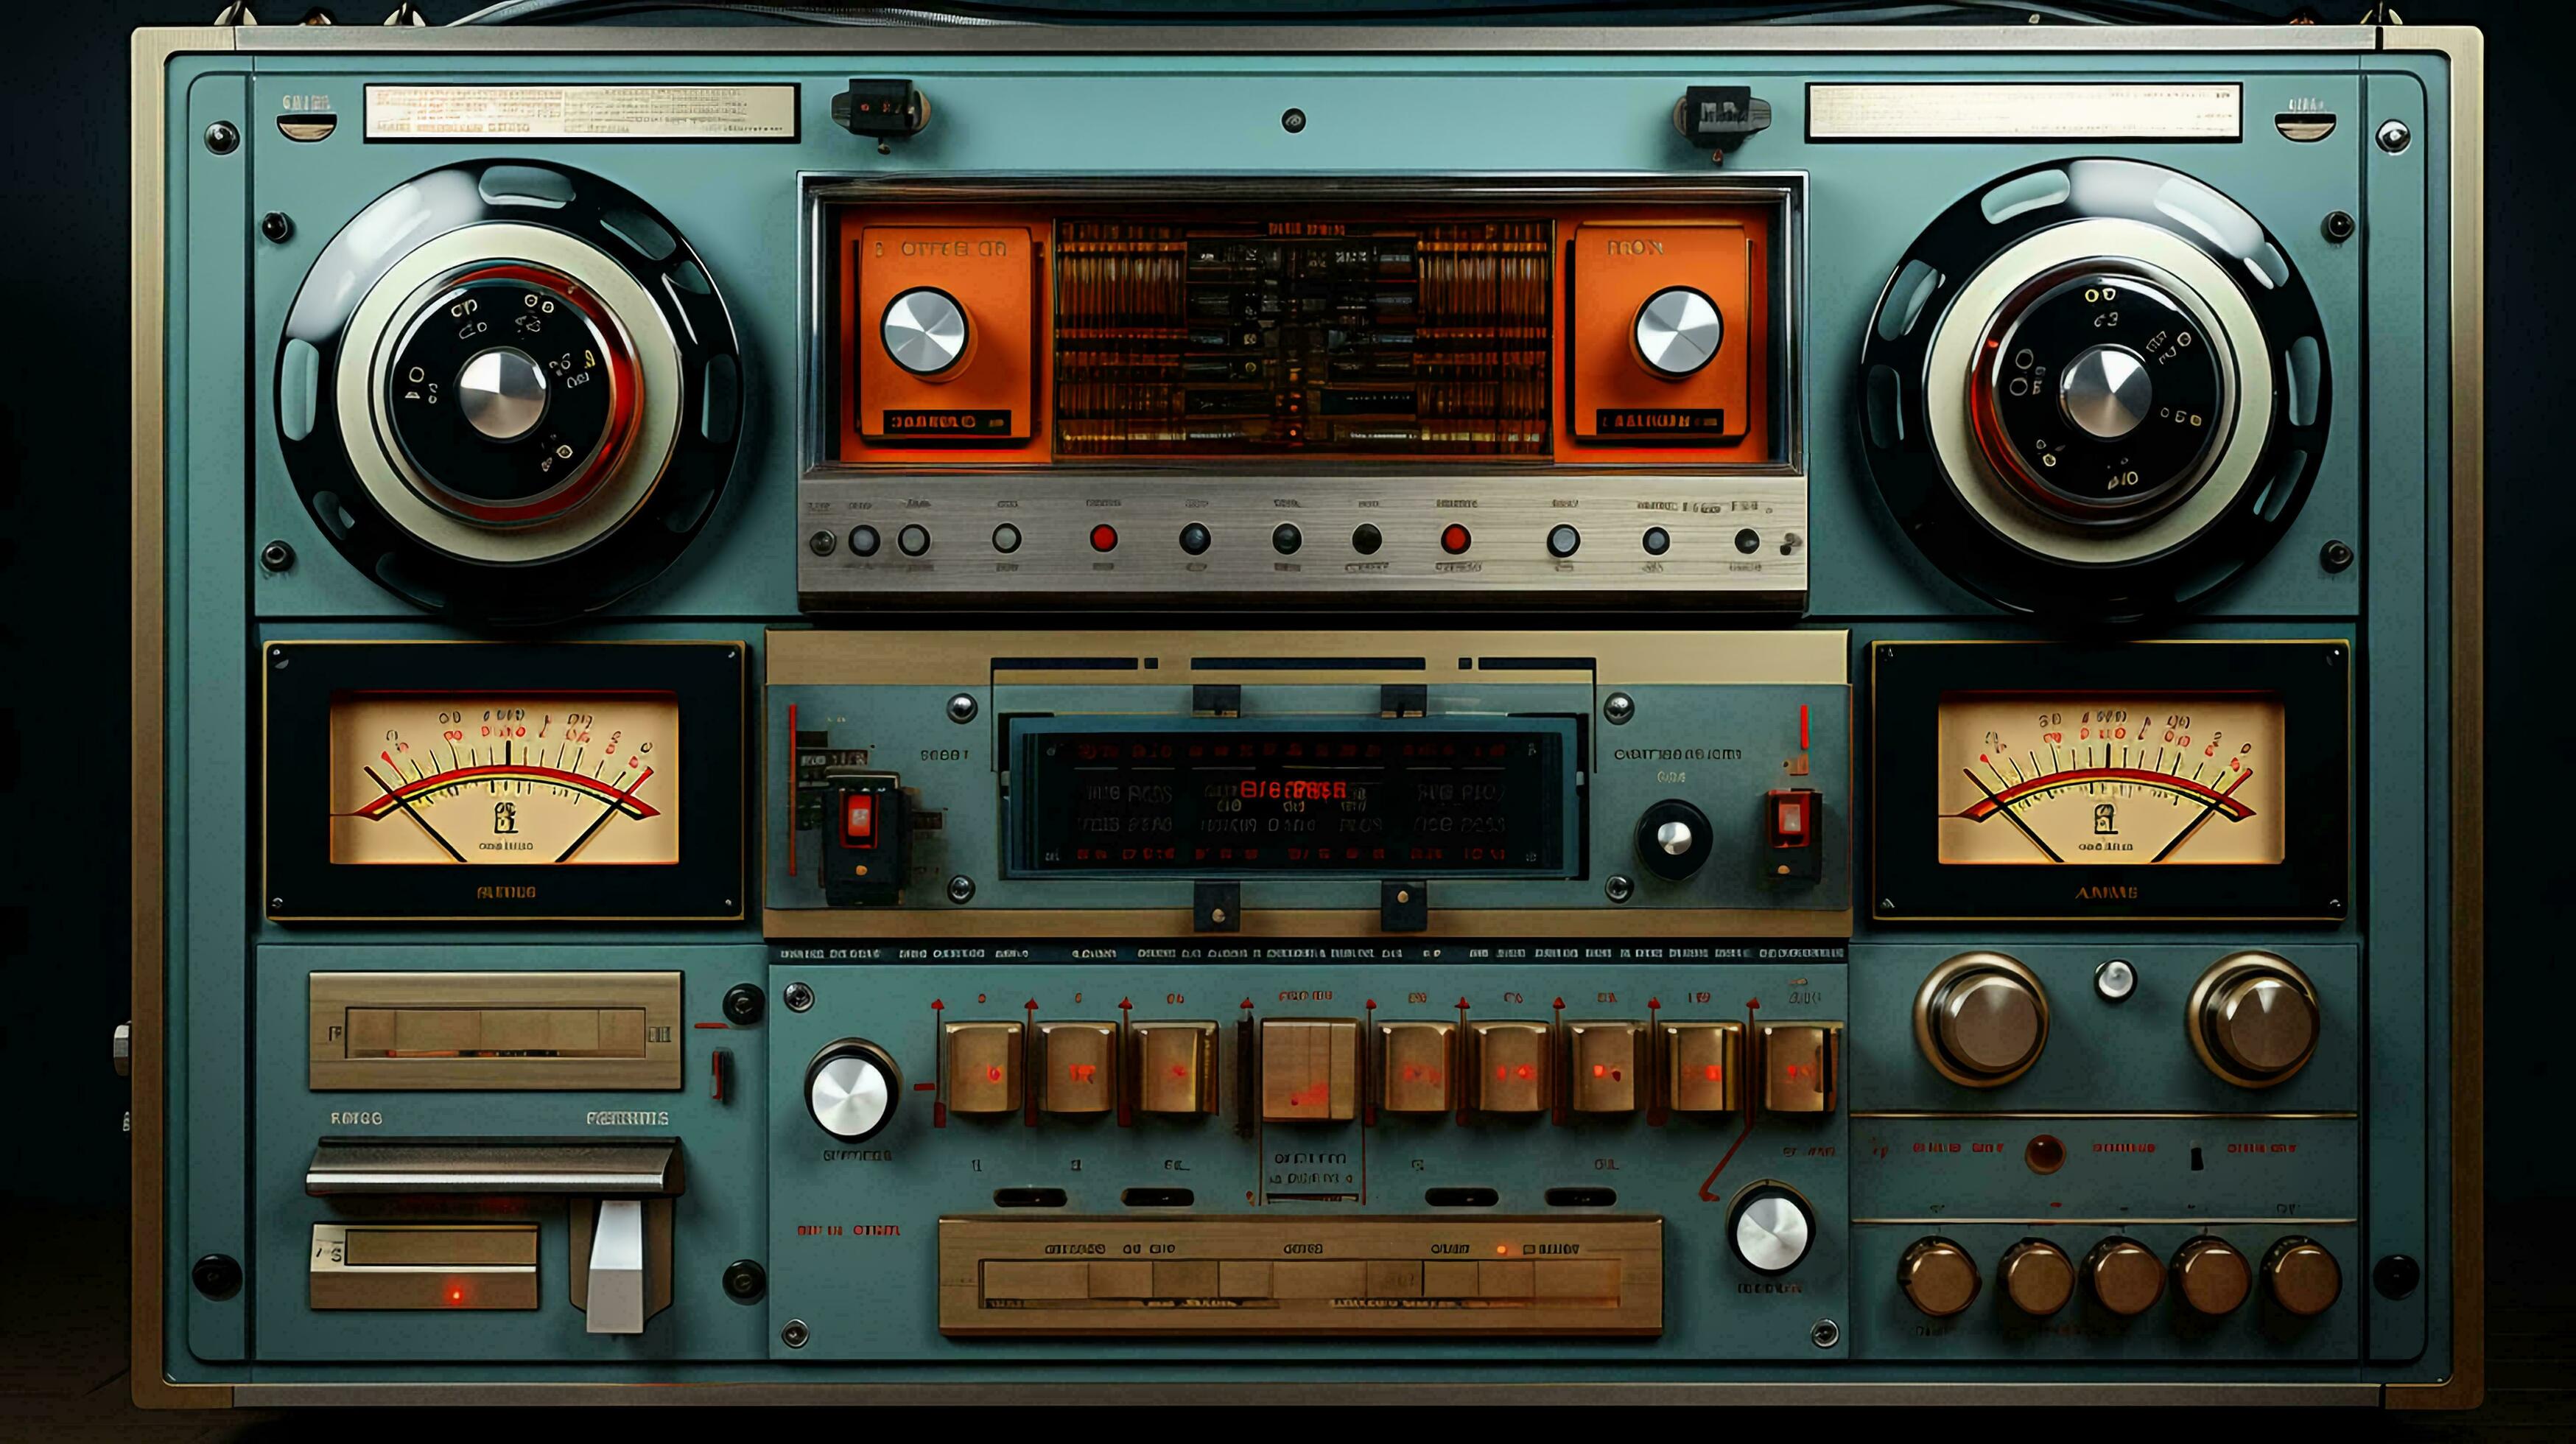 https://static.vecteezy.com/system/resources/previews/029/573/486/large_2x/old-stylish-vintage-audio-retro-music-cassette-tape-recorder-poster-from-the-80s-90s-free-photo.jpg